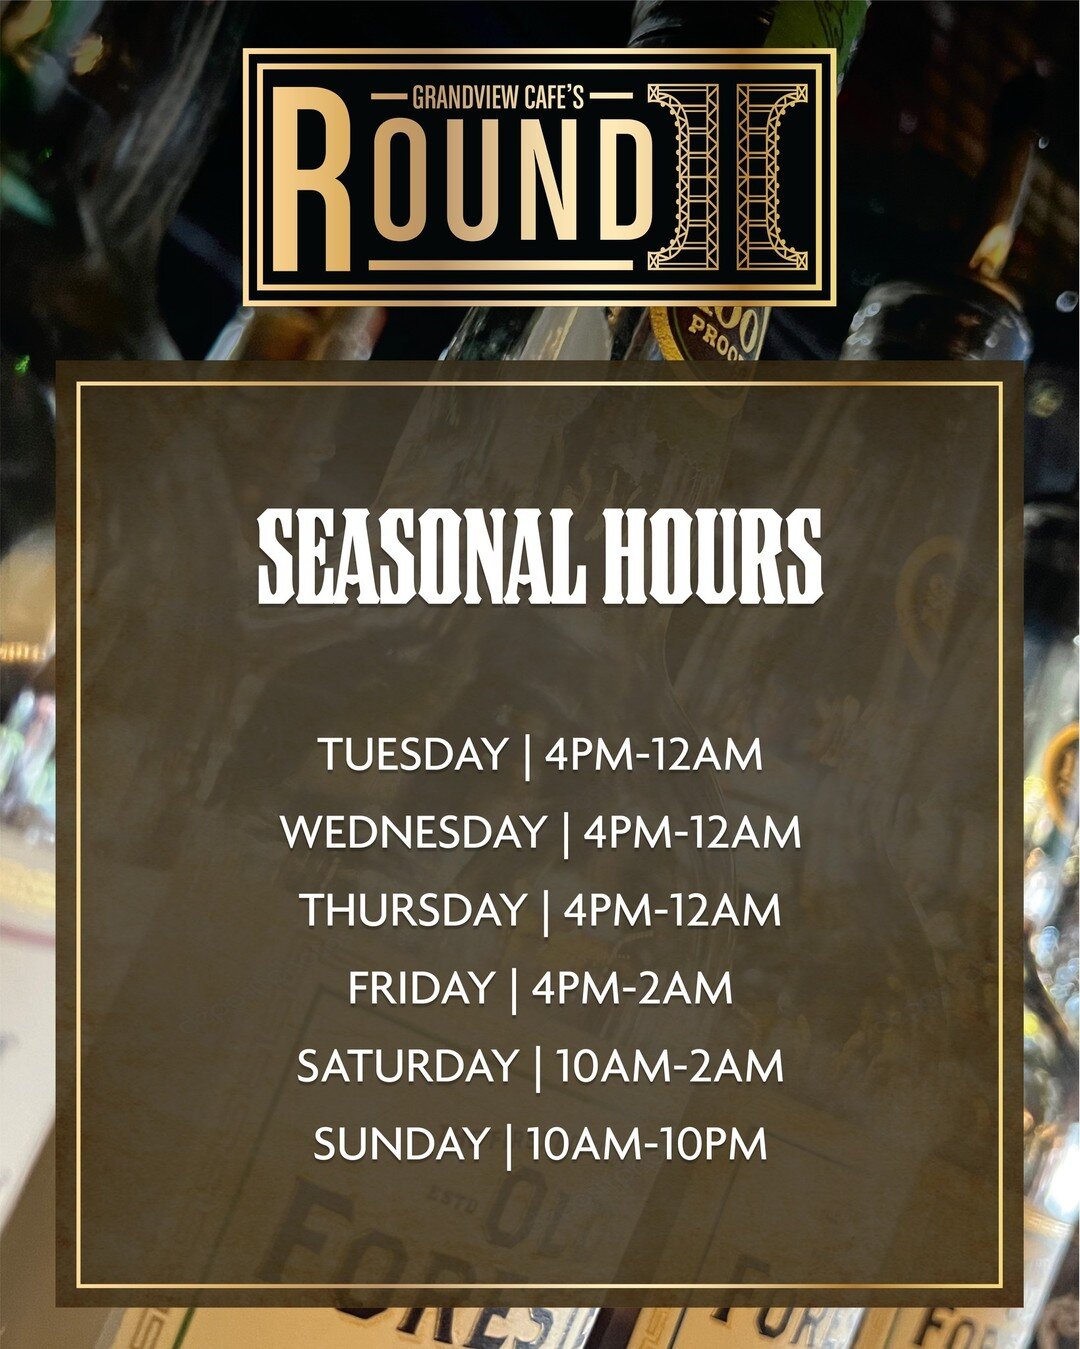 SEASONAL HOURS | As we come into the winter season at Round II, we&rsquo;re updating our hours. Be sure to review them carefully so you know when you can come party with us next. We can&rsquo;t wait to see you this winter!

#seasonalhours #newhours #